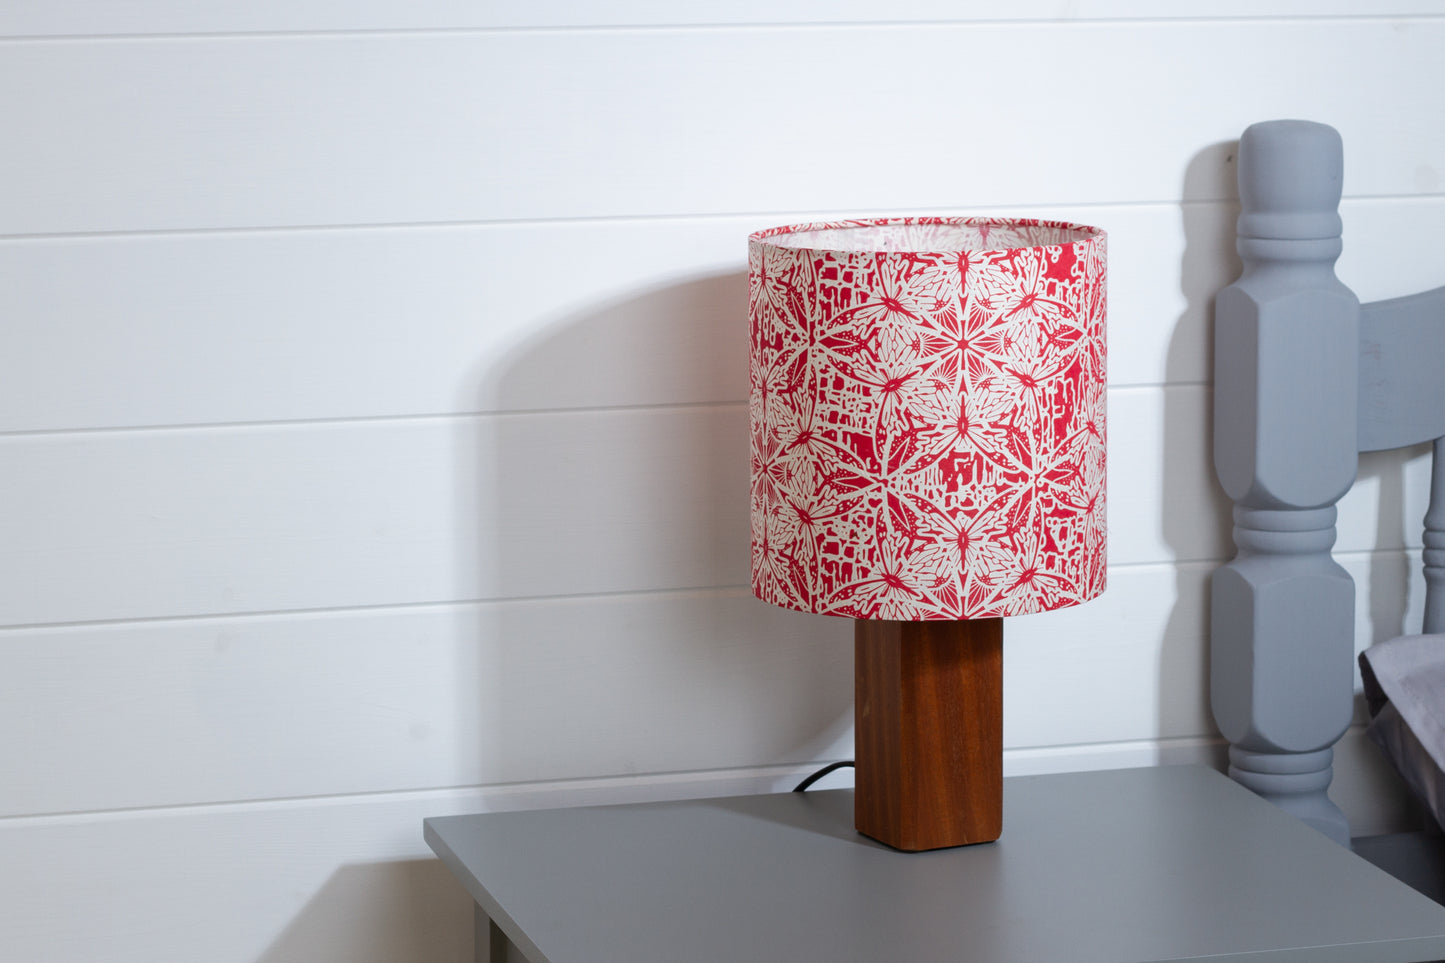 Square Sapele Table Lamp with 20cm Drum Lamp Shade B137 ~ Butterfly Kaleidoscope Red